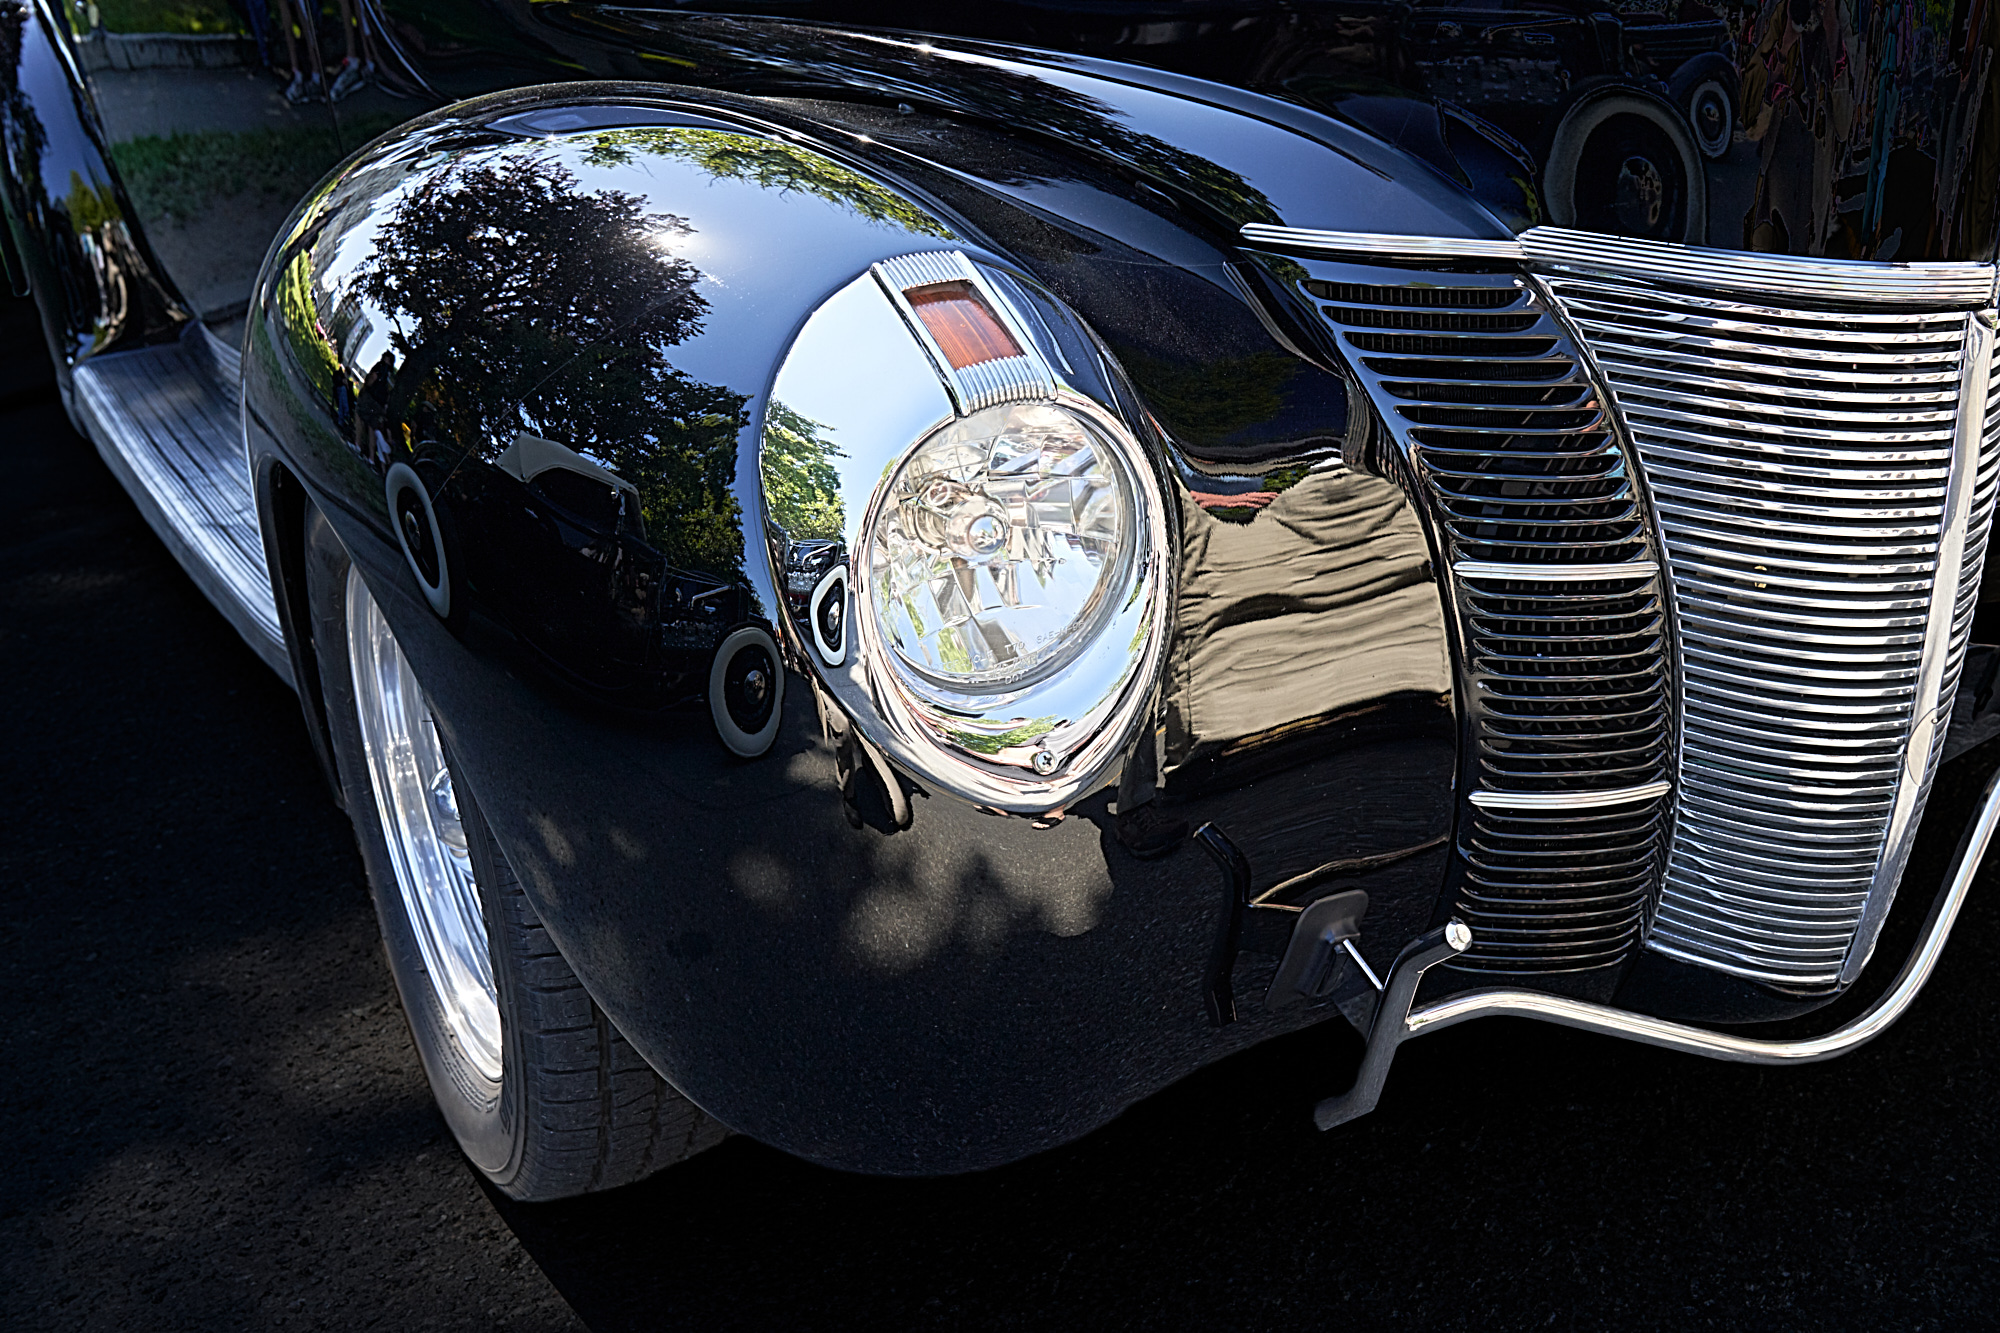 Reflections - 1940 Ford Coupe